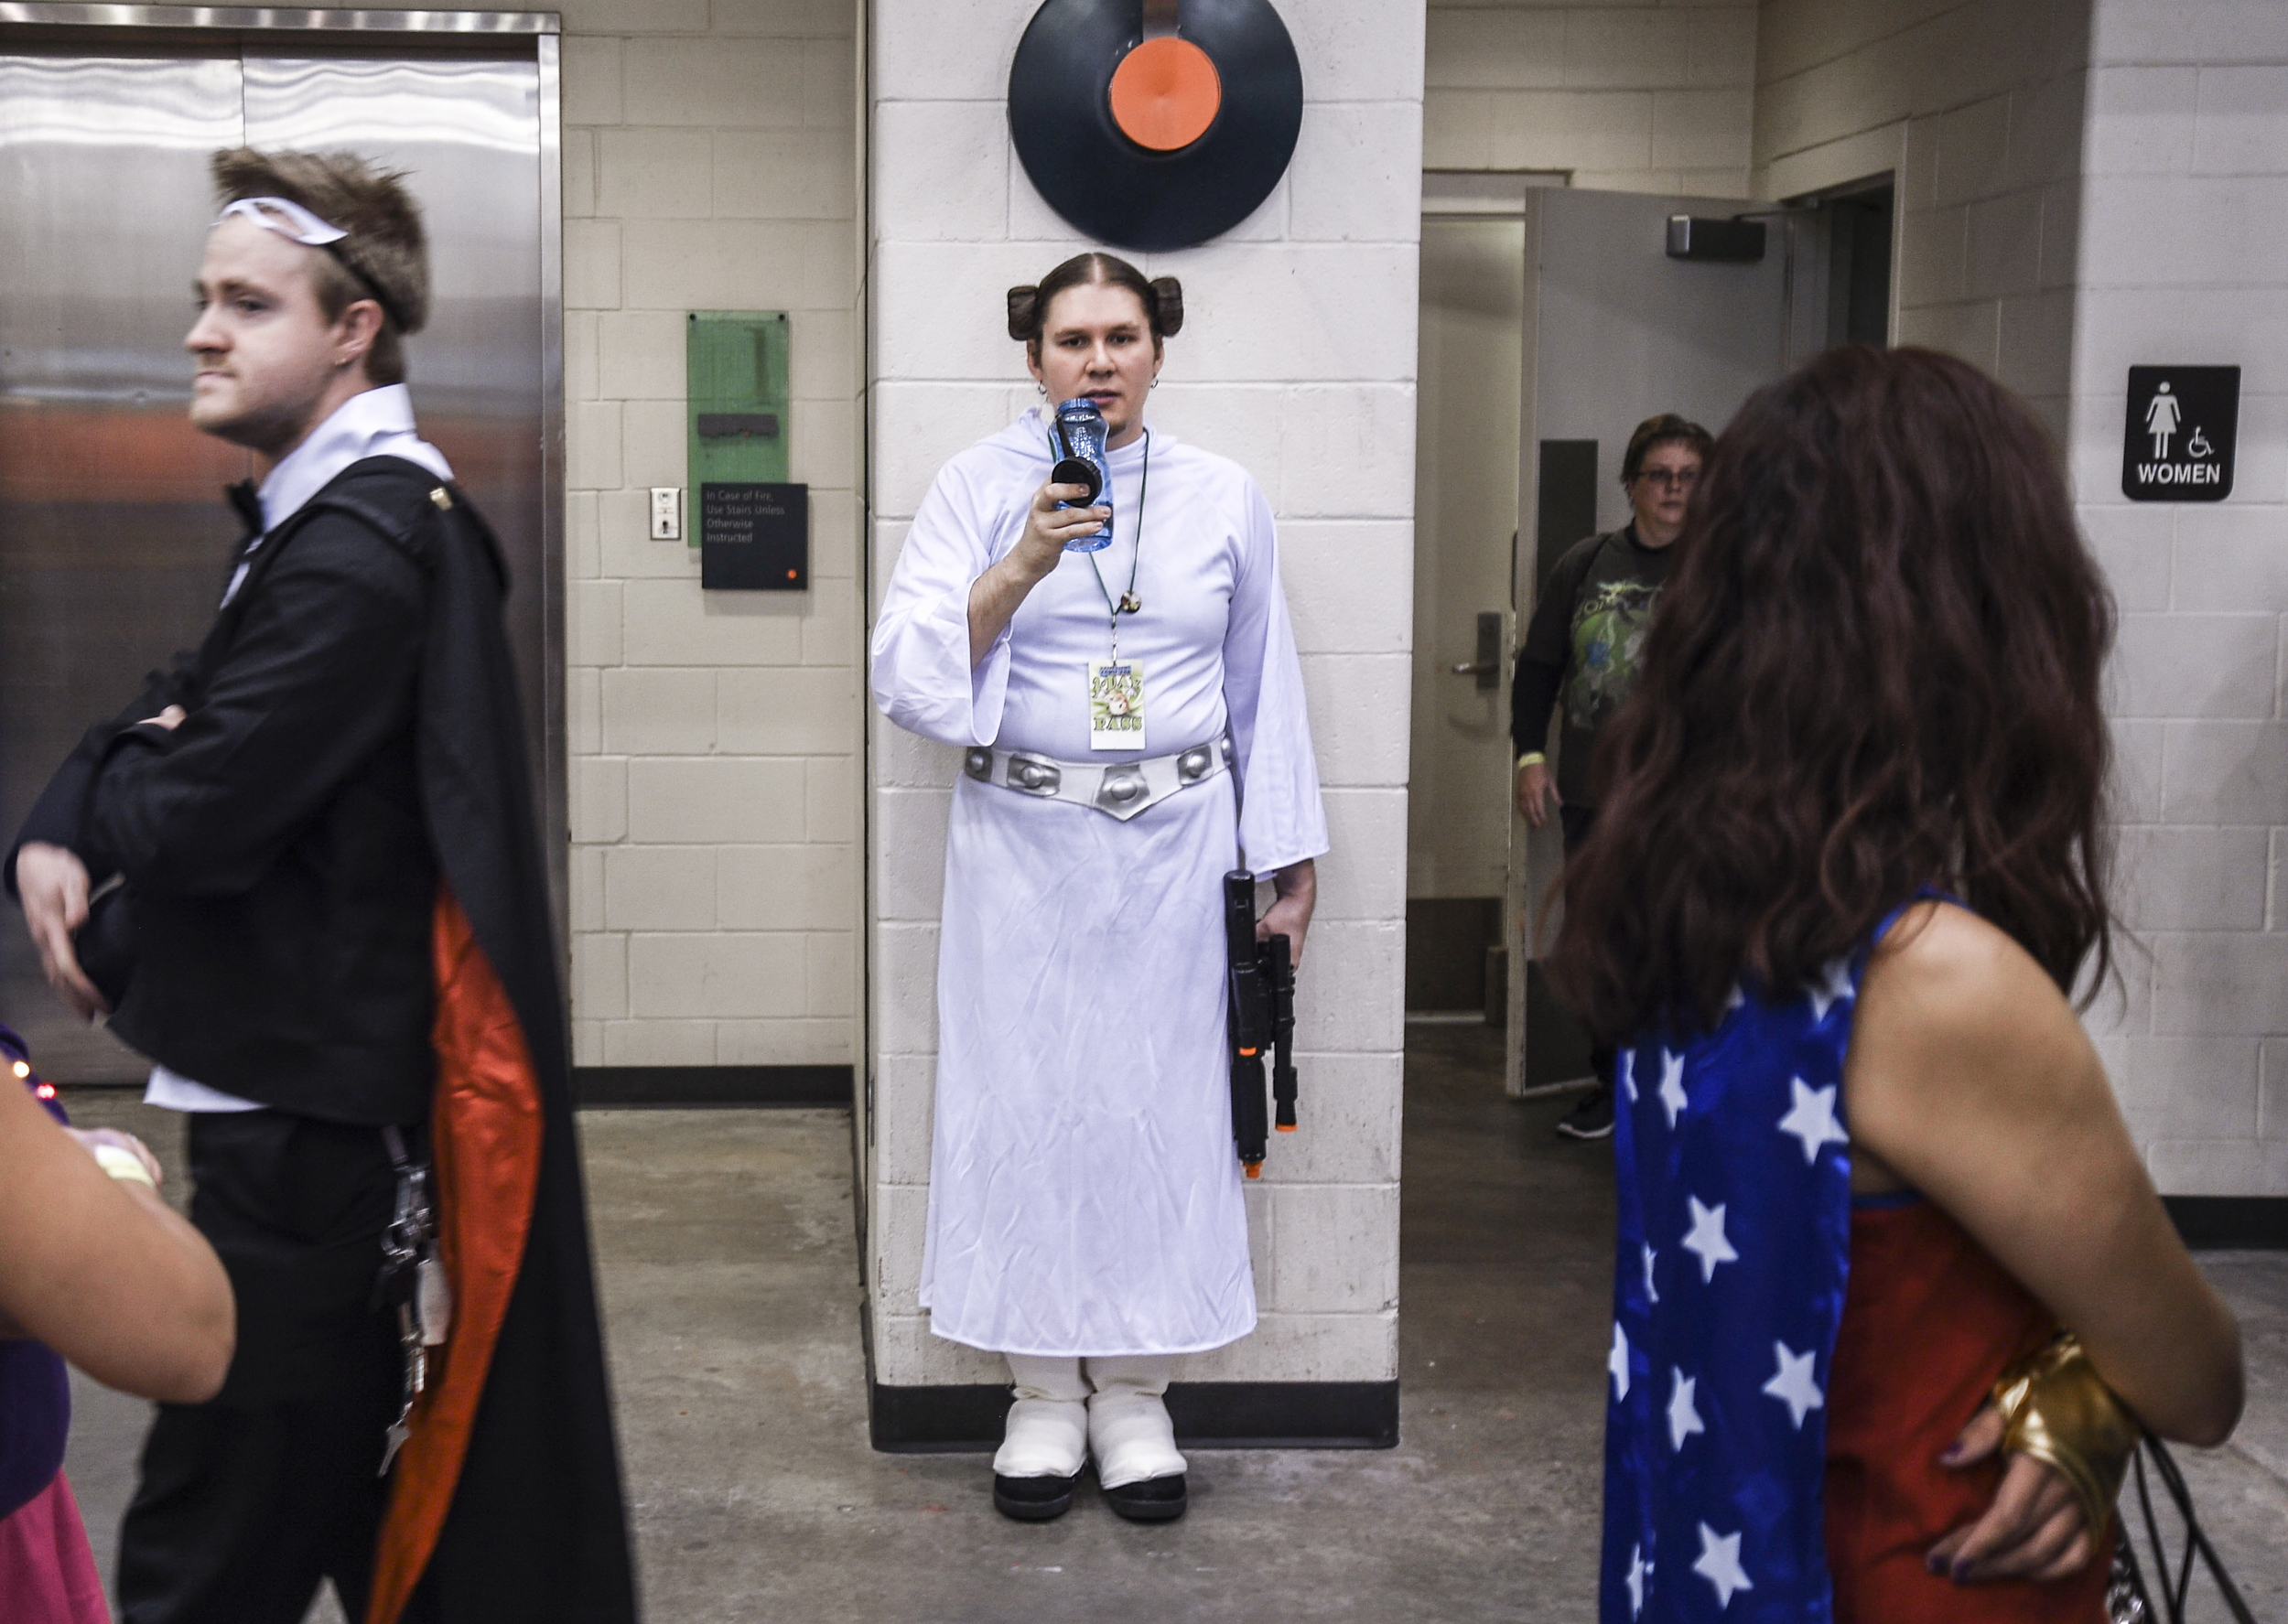  Andrew Perry, dressed as Star Wars' "Princess Leia", waits for his wife outside the women's restroom during Grand Rapids 2015 Comic-Con festival Saturday, Oct. 17, 2015, at DeVos Place in Grand Rapids, Mich. "My wife is dressed as Han Solo because w